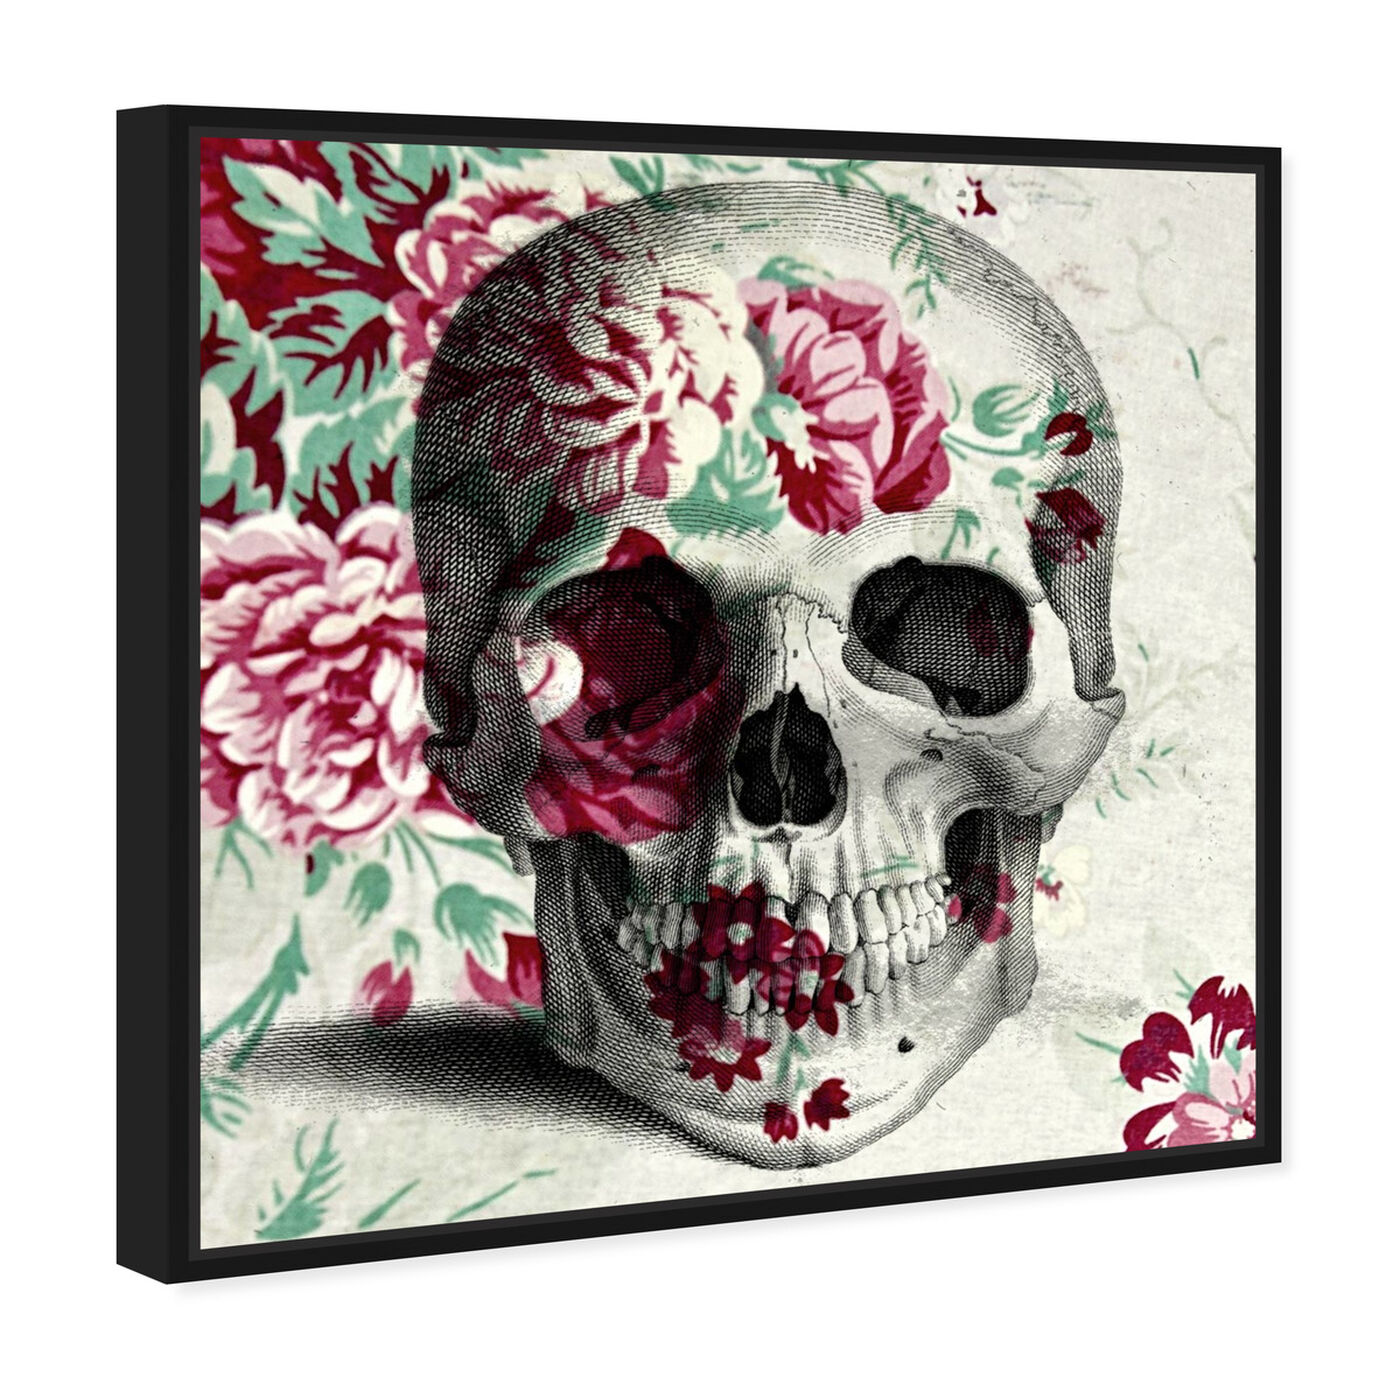 Angled view of Spring Skull featuring symbols and objects and skull art.